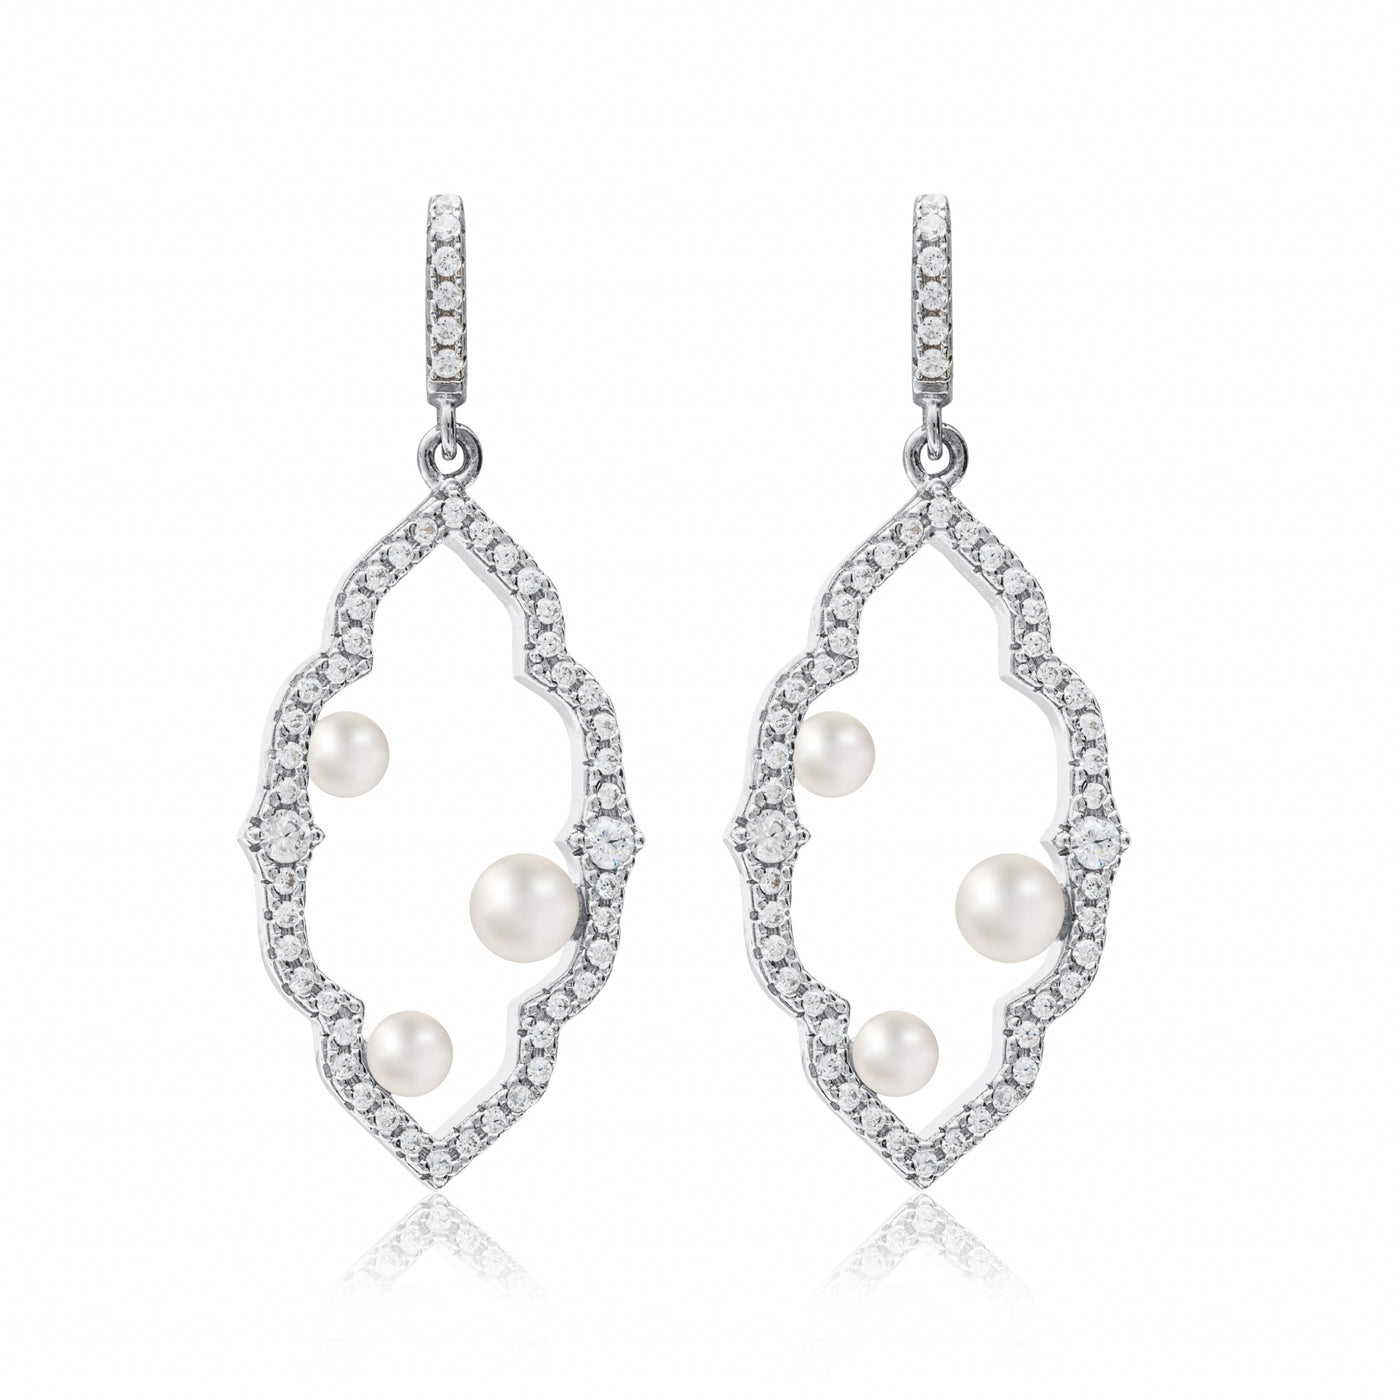 Analis Stoned Pearls - Boucles d'oreilles